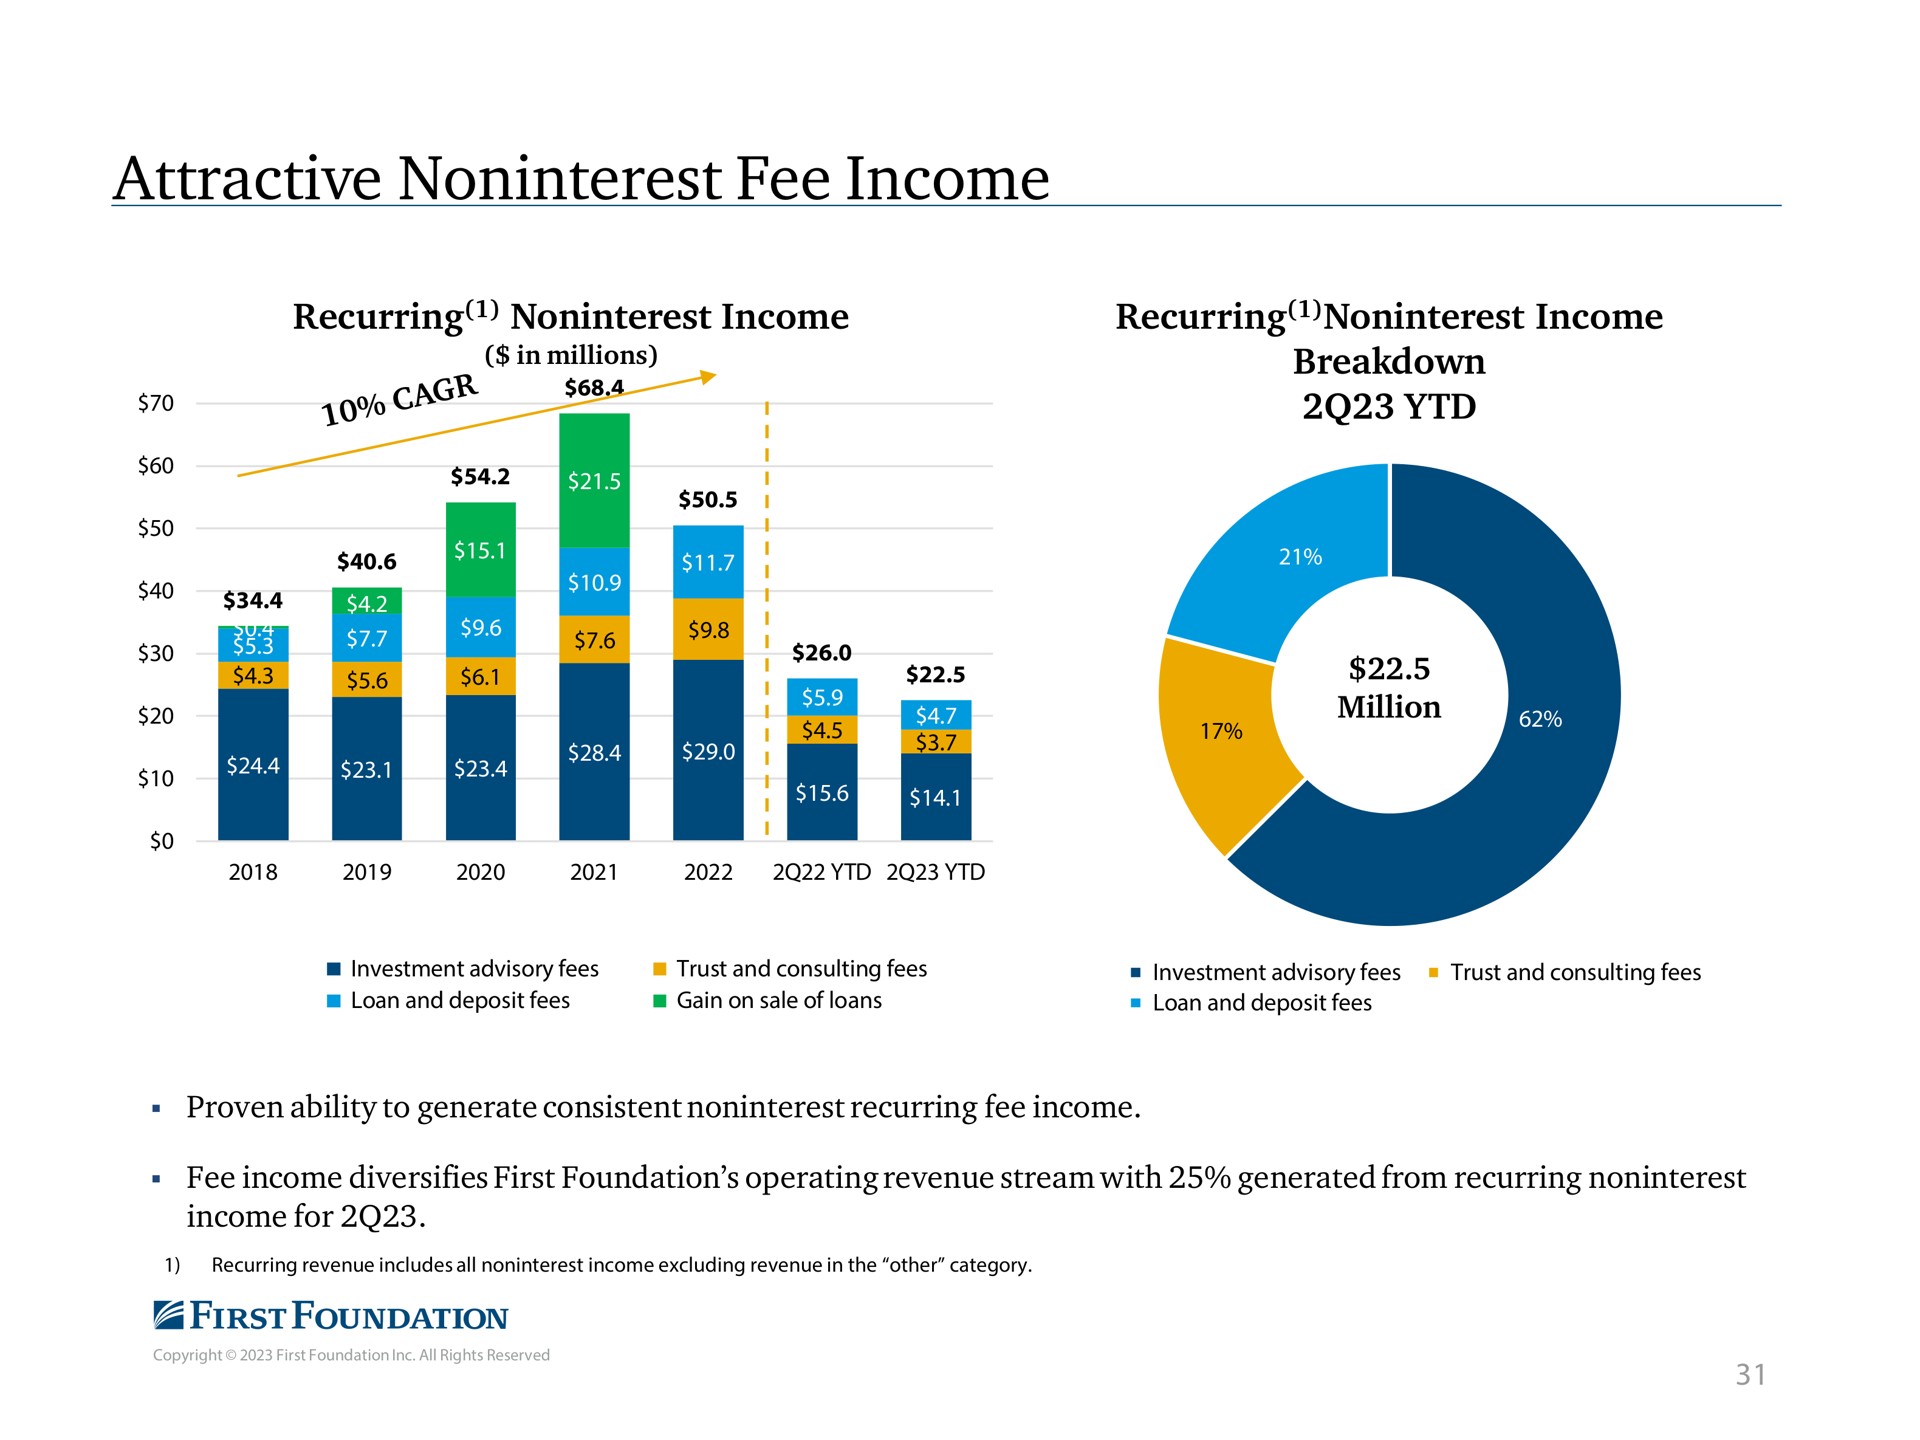 attractive fee income recurring income recurring income breakdown in millions cage sas | First Foundation